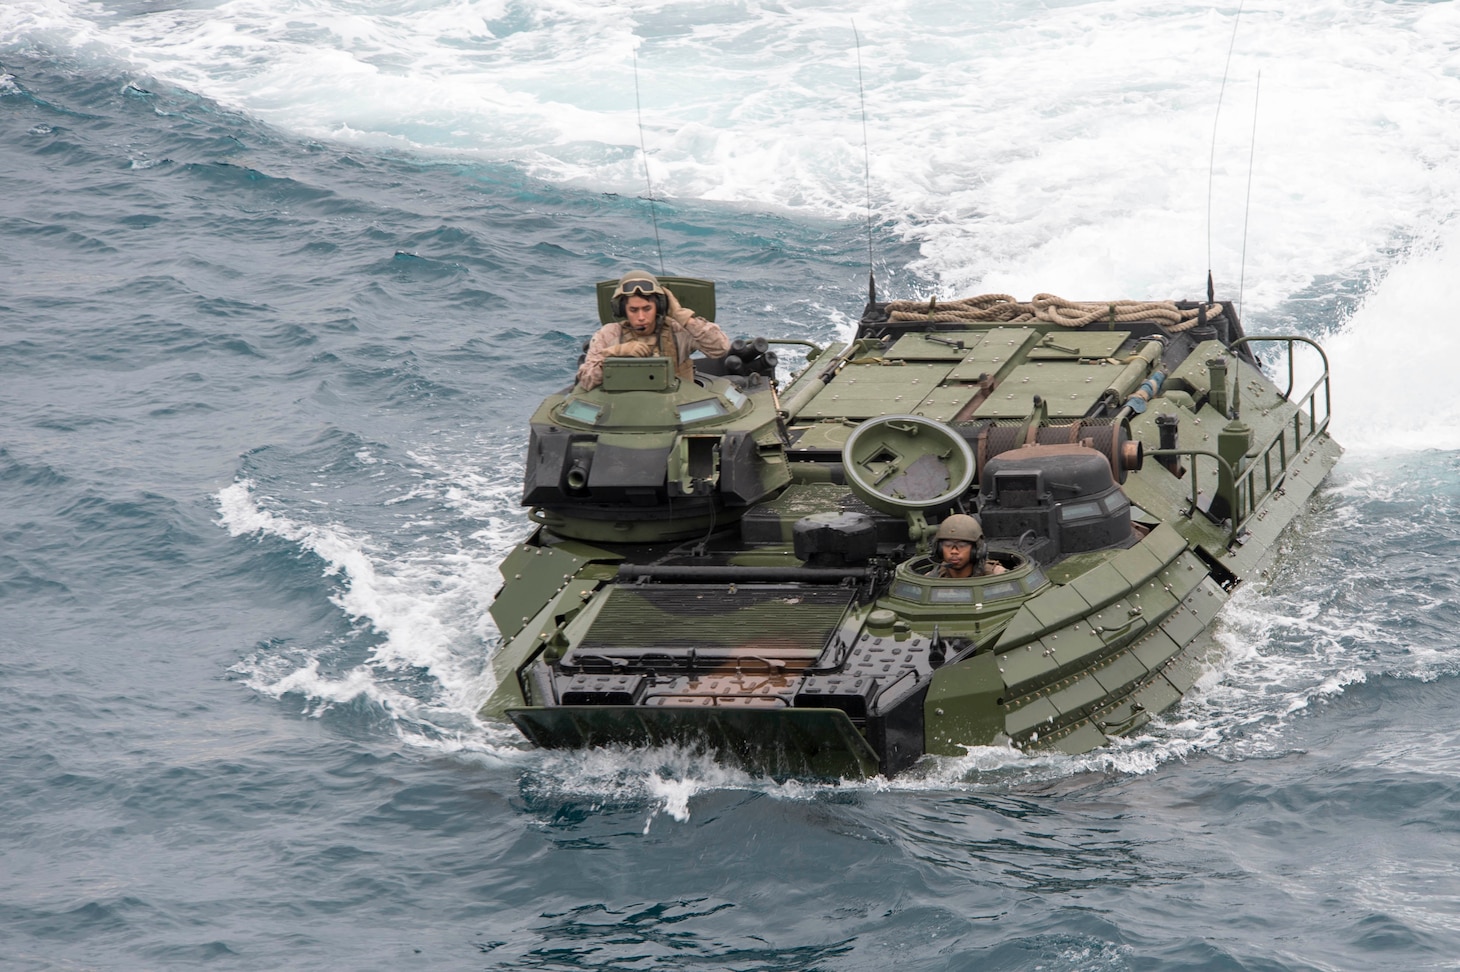 180202-N-DC385-389 WHITE BEACH, Okinawa (Feb. 2, 2018) Amphibious assault vehicles (AAV), attached to the 3d Marine Division (MARDIV), approach the well deck of the amphibious assault ship USS Bonhomme Richard (LHD 6).